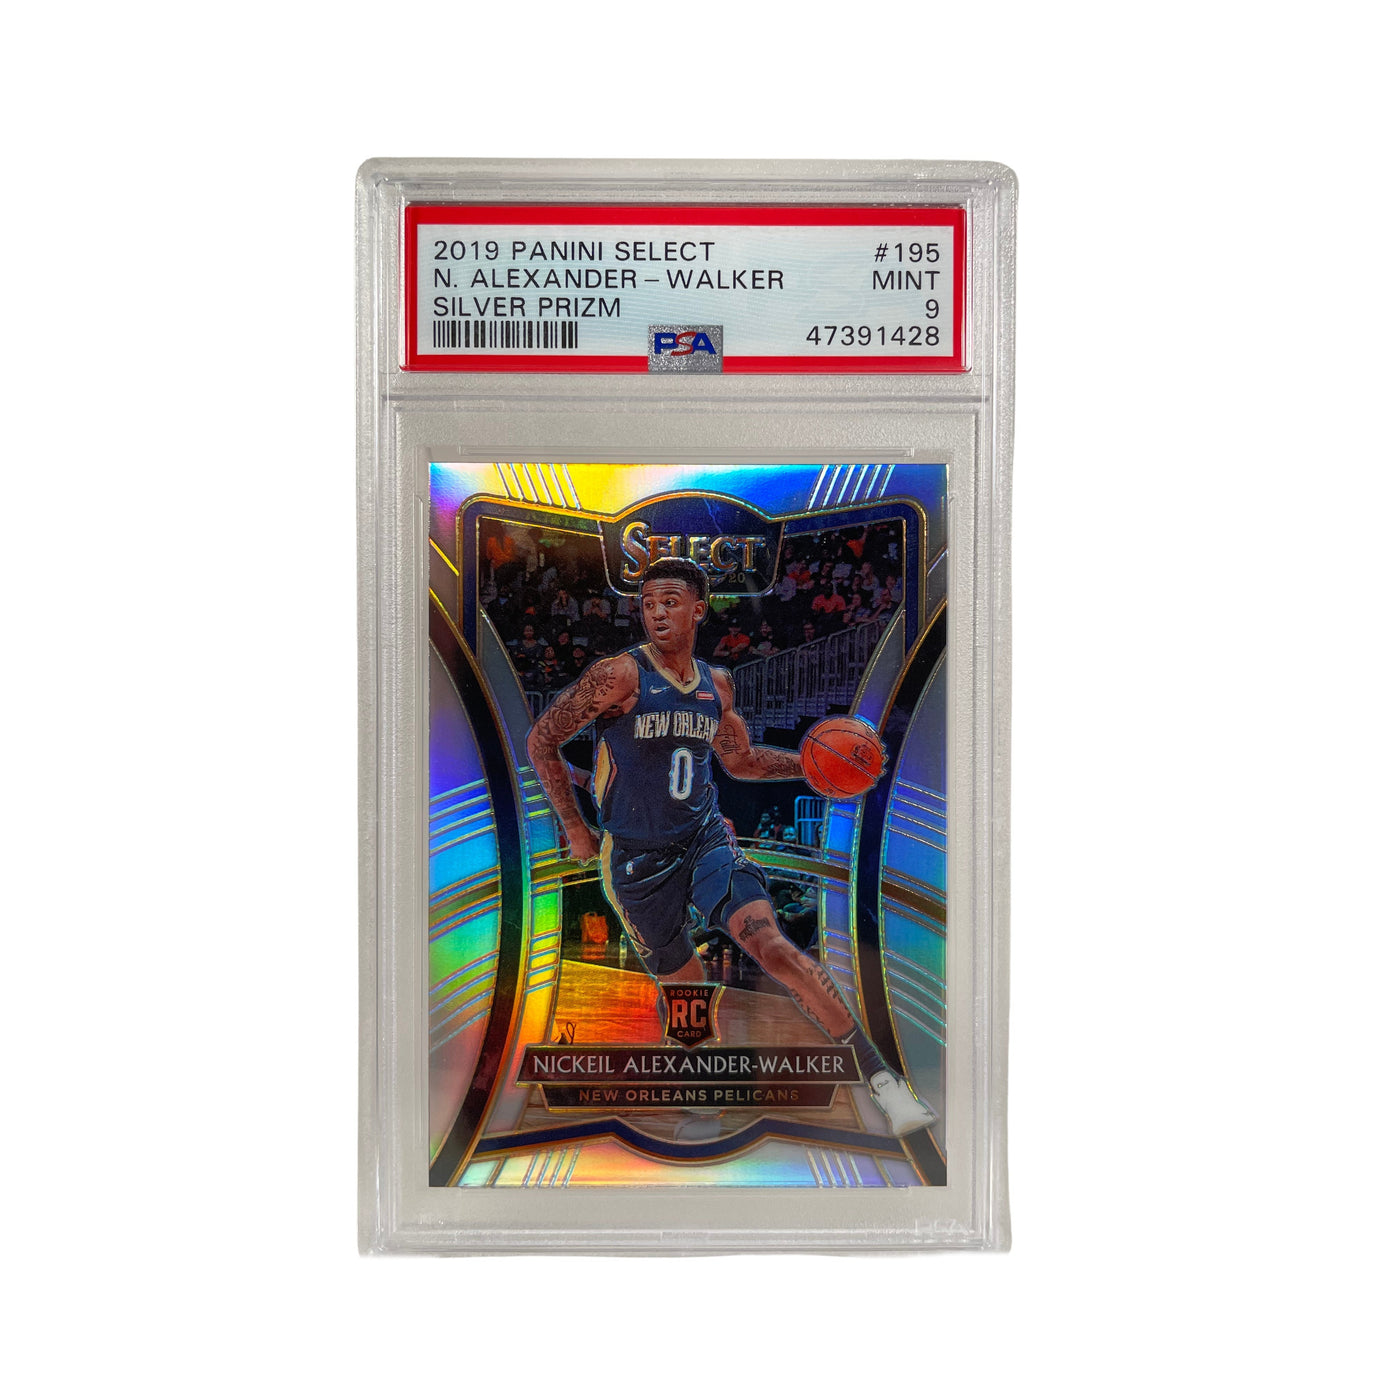 Nickeil Alexander-Walker 2019 Panini Select Silver Prizm PSA 9 New Orleans Pelicans